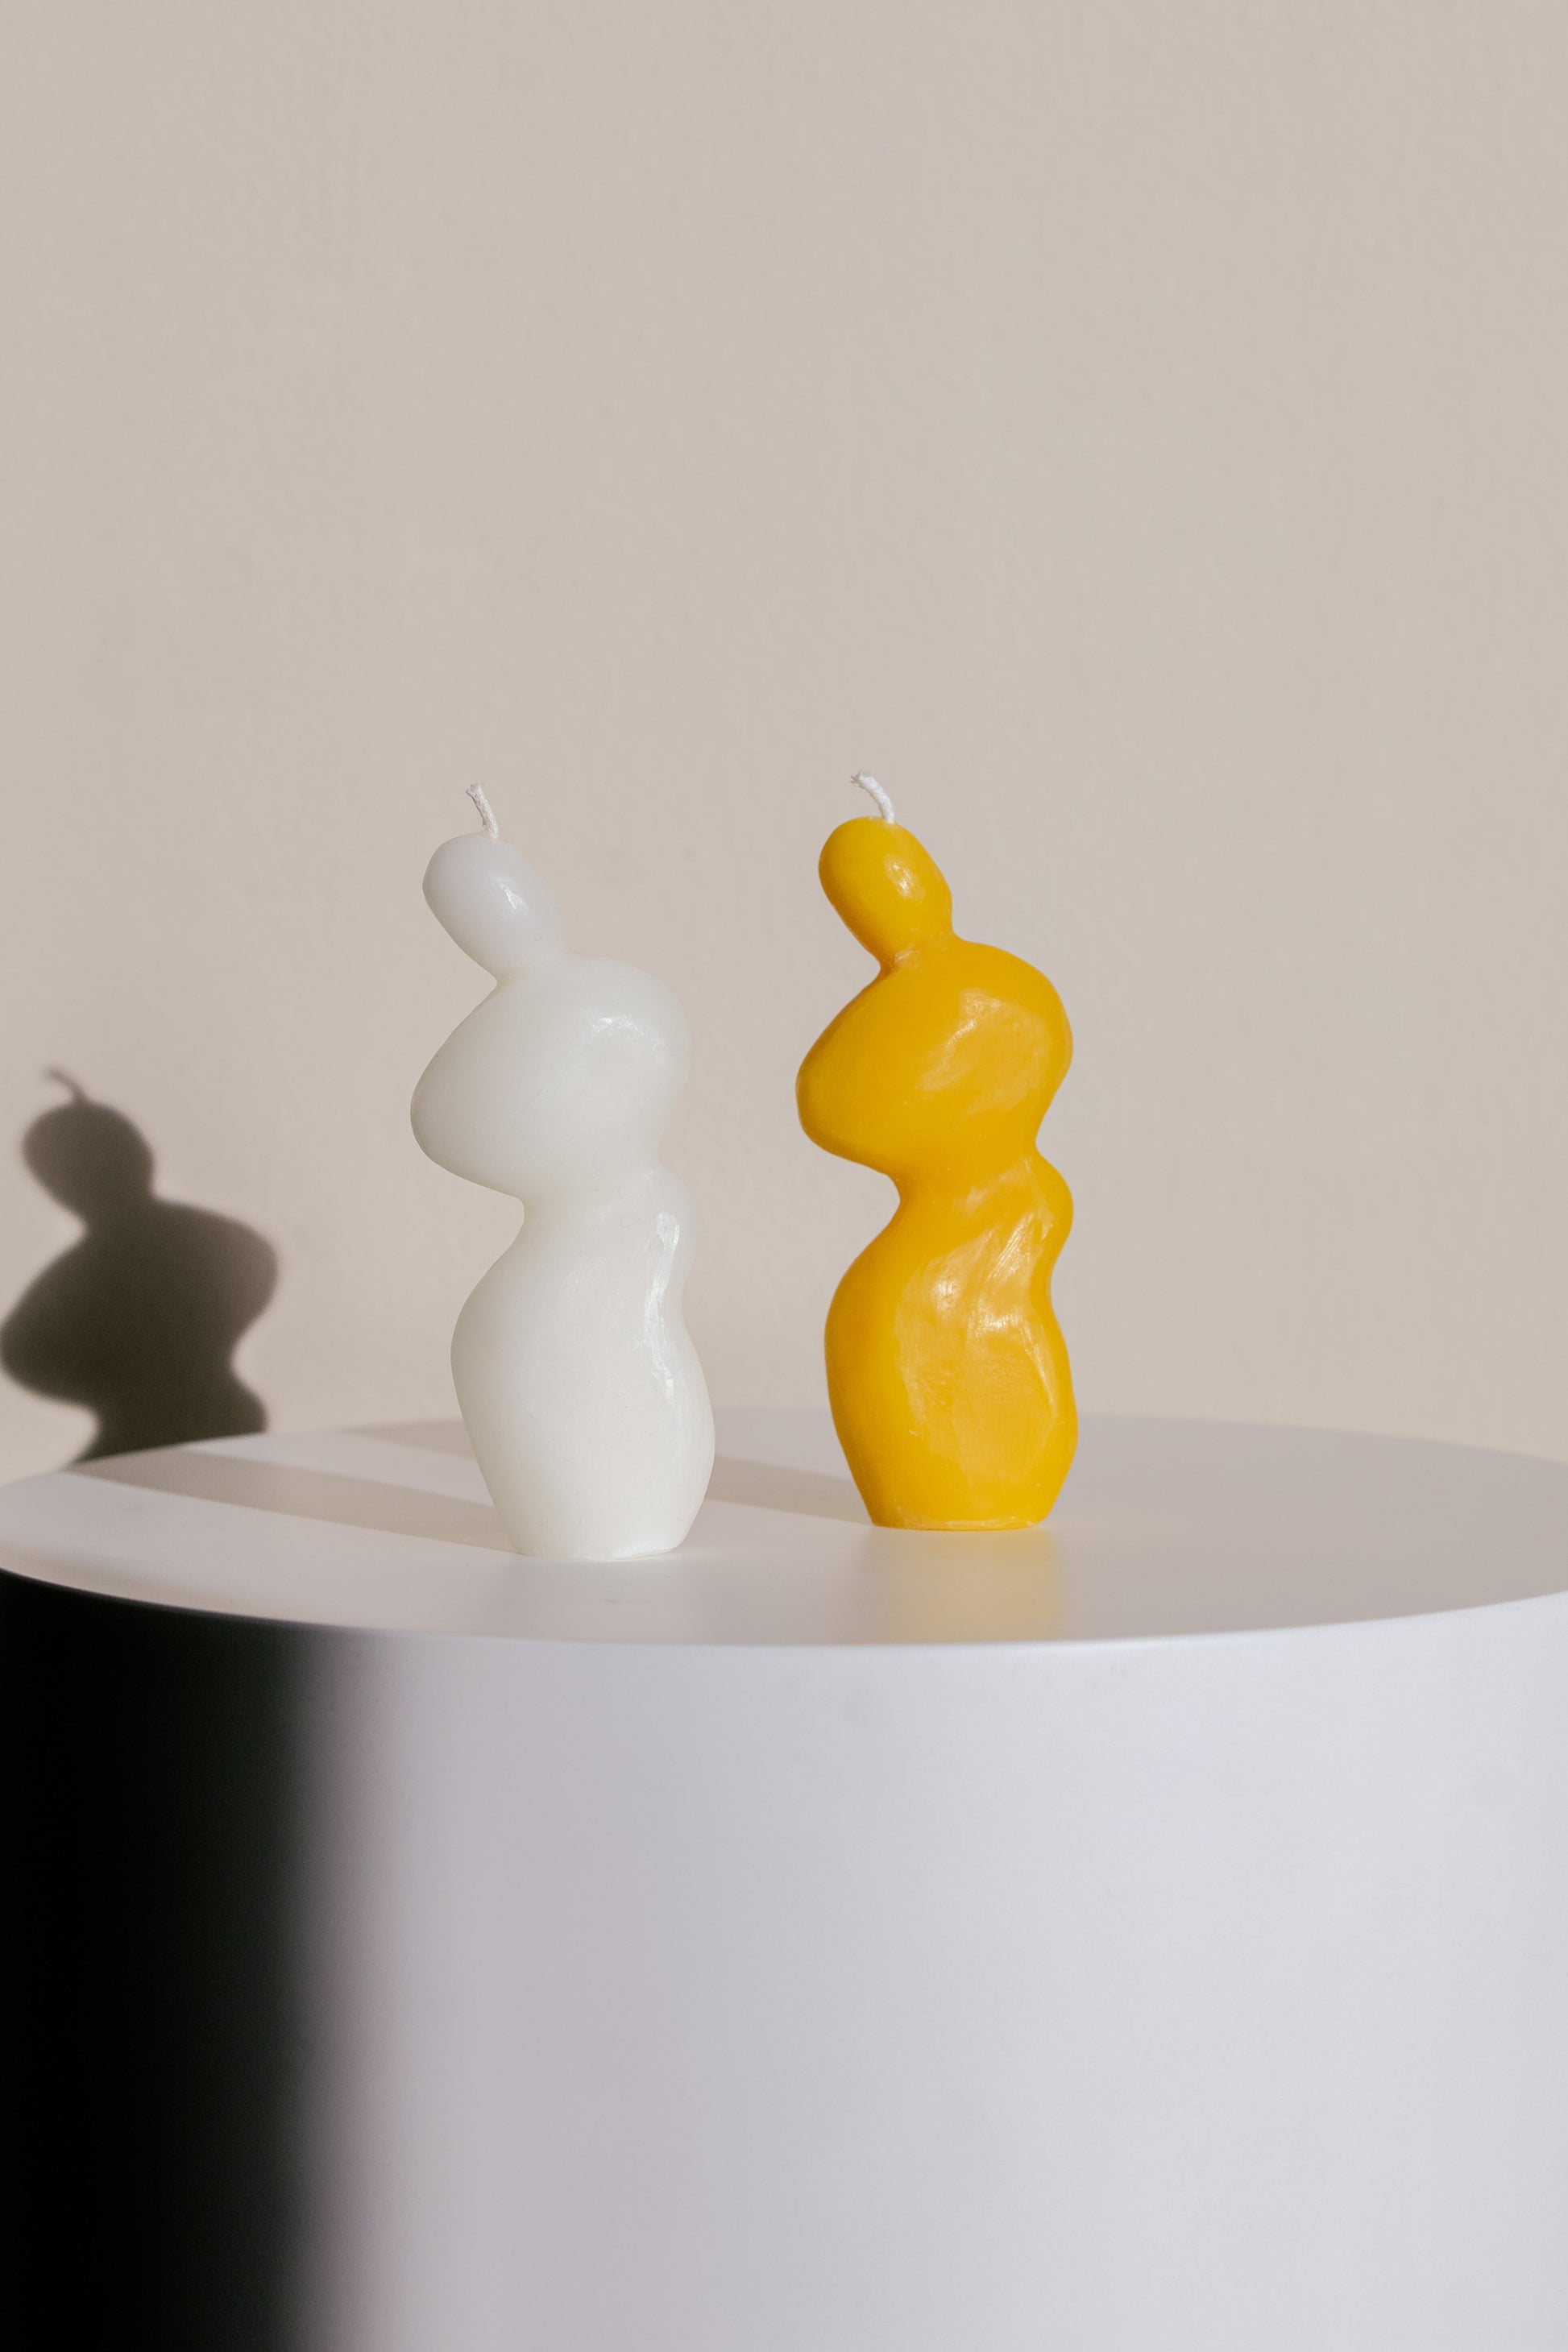 Two Handmade Human Form Sculptural Candles Made from Yellow and White Beeswax